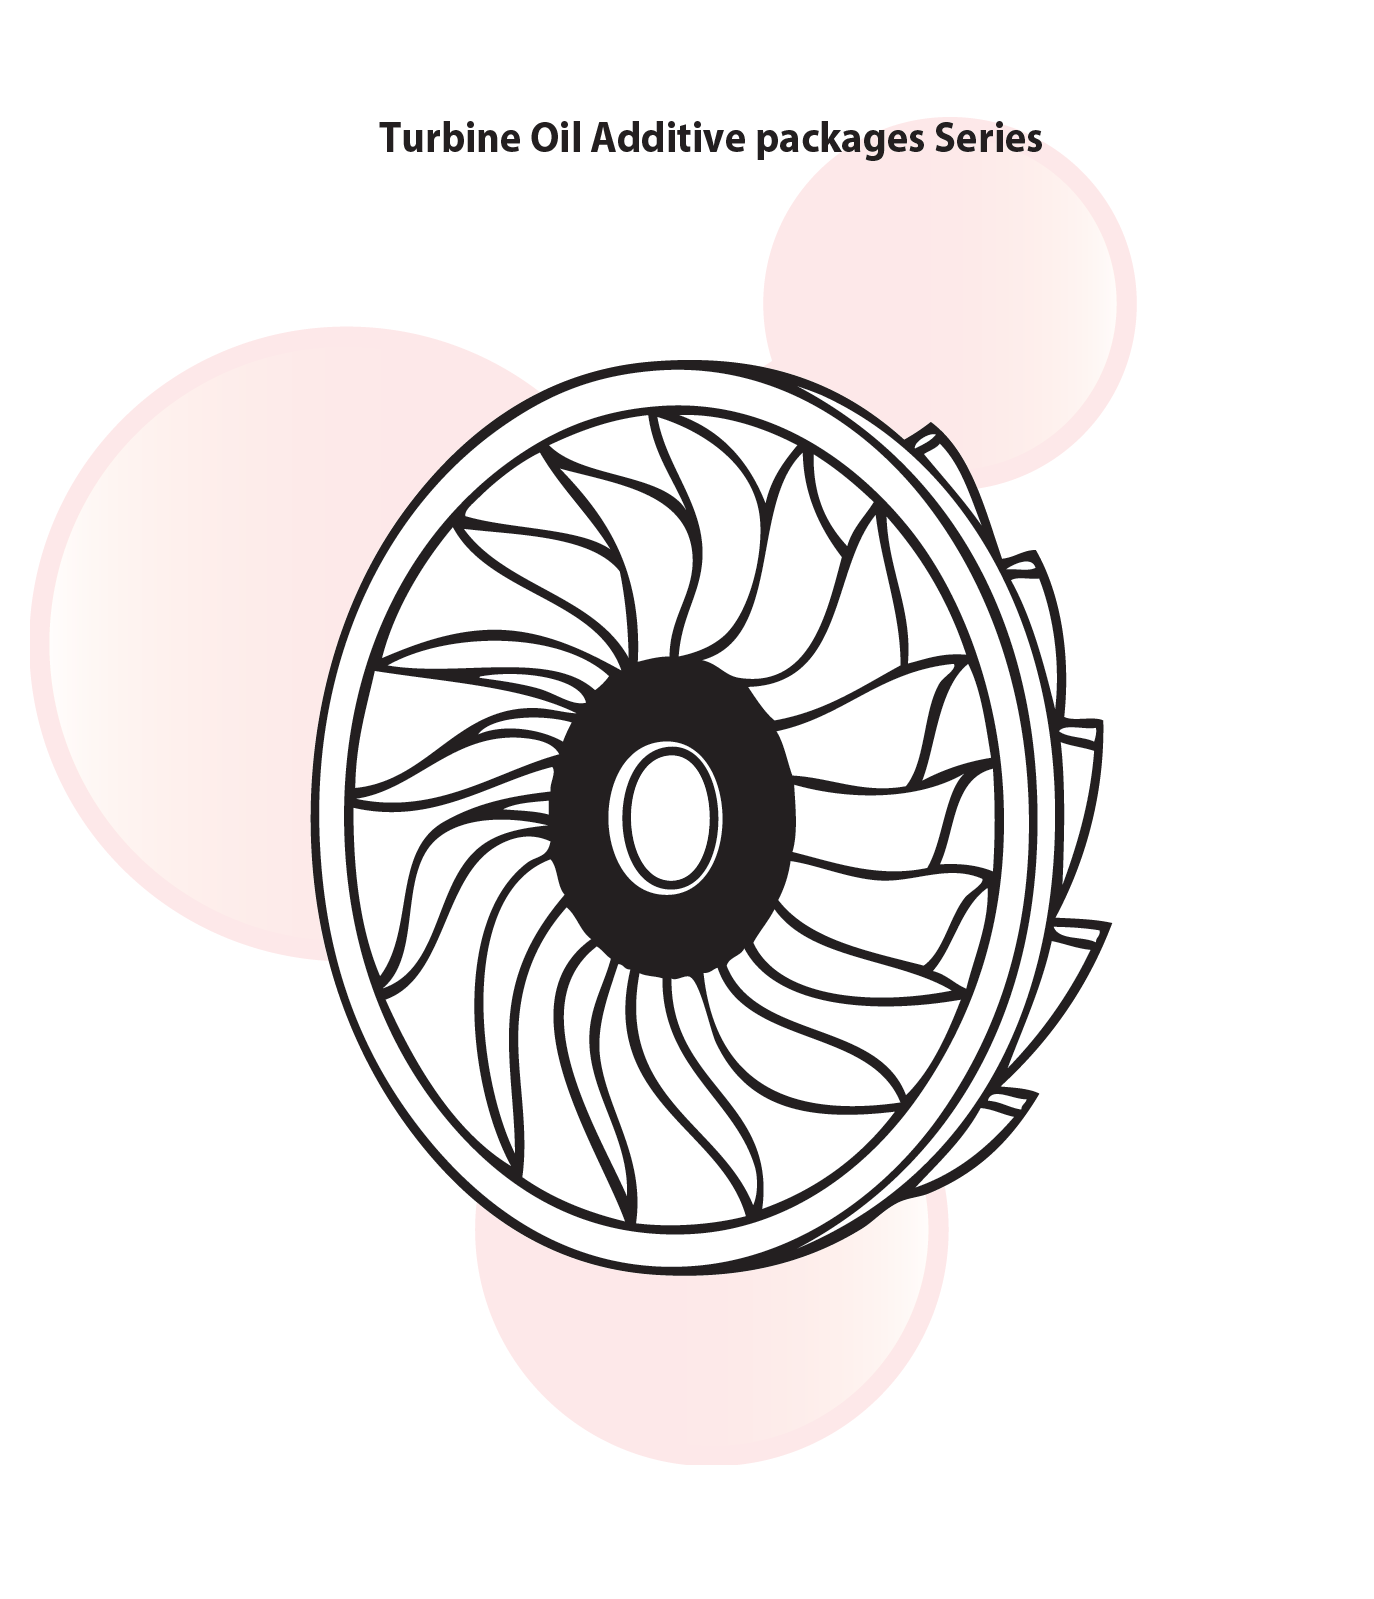 Turbine Oil Additive packages Series